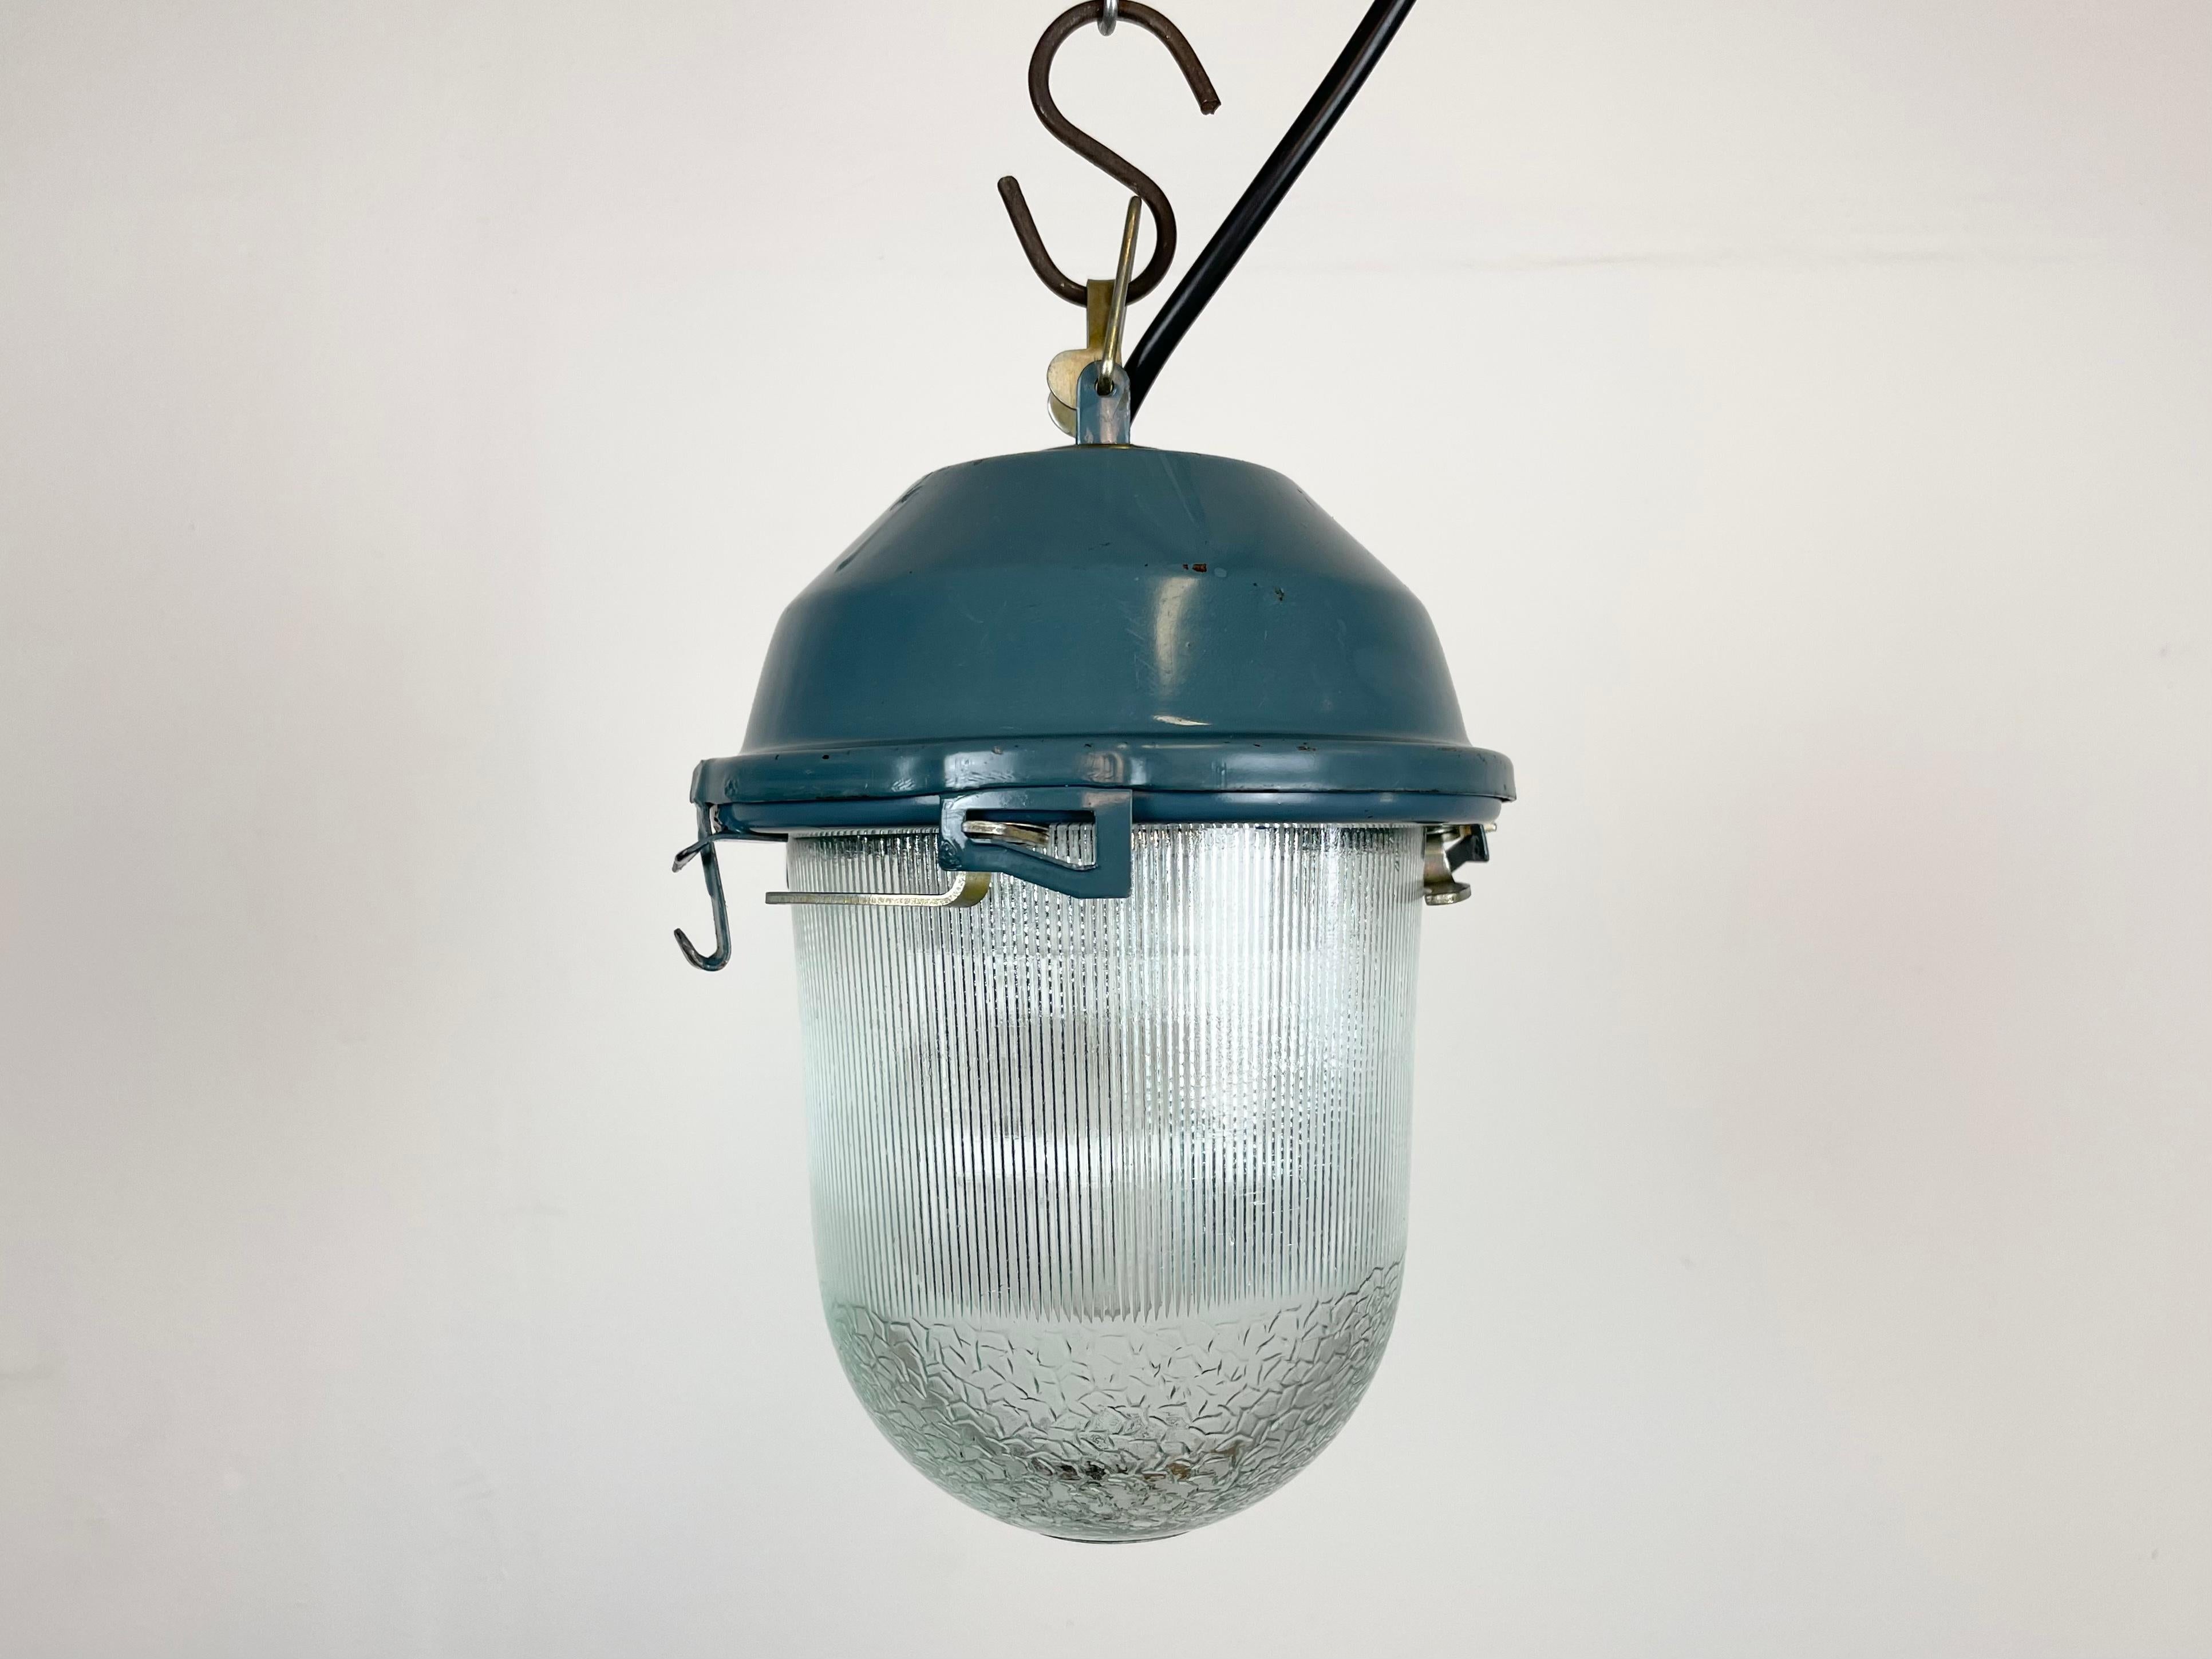 - Vintage Industrial lamp from the 1970s 
- Made in former Soviet Union
- Blue iron top
- Stripped glass cover
- The socket requires E 27 lightbulbs 
- New wire 
- Diameter: 15 cm
- Weight : 1,5 kg.